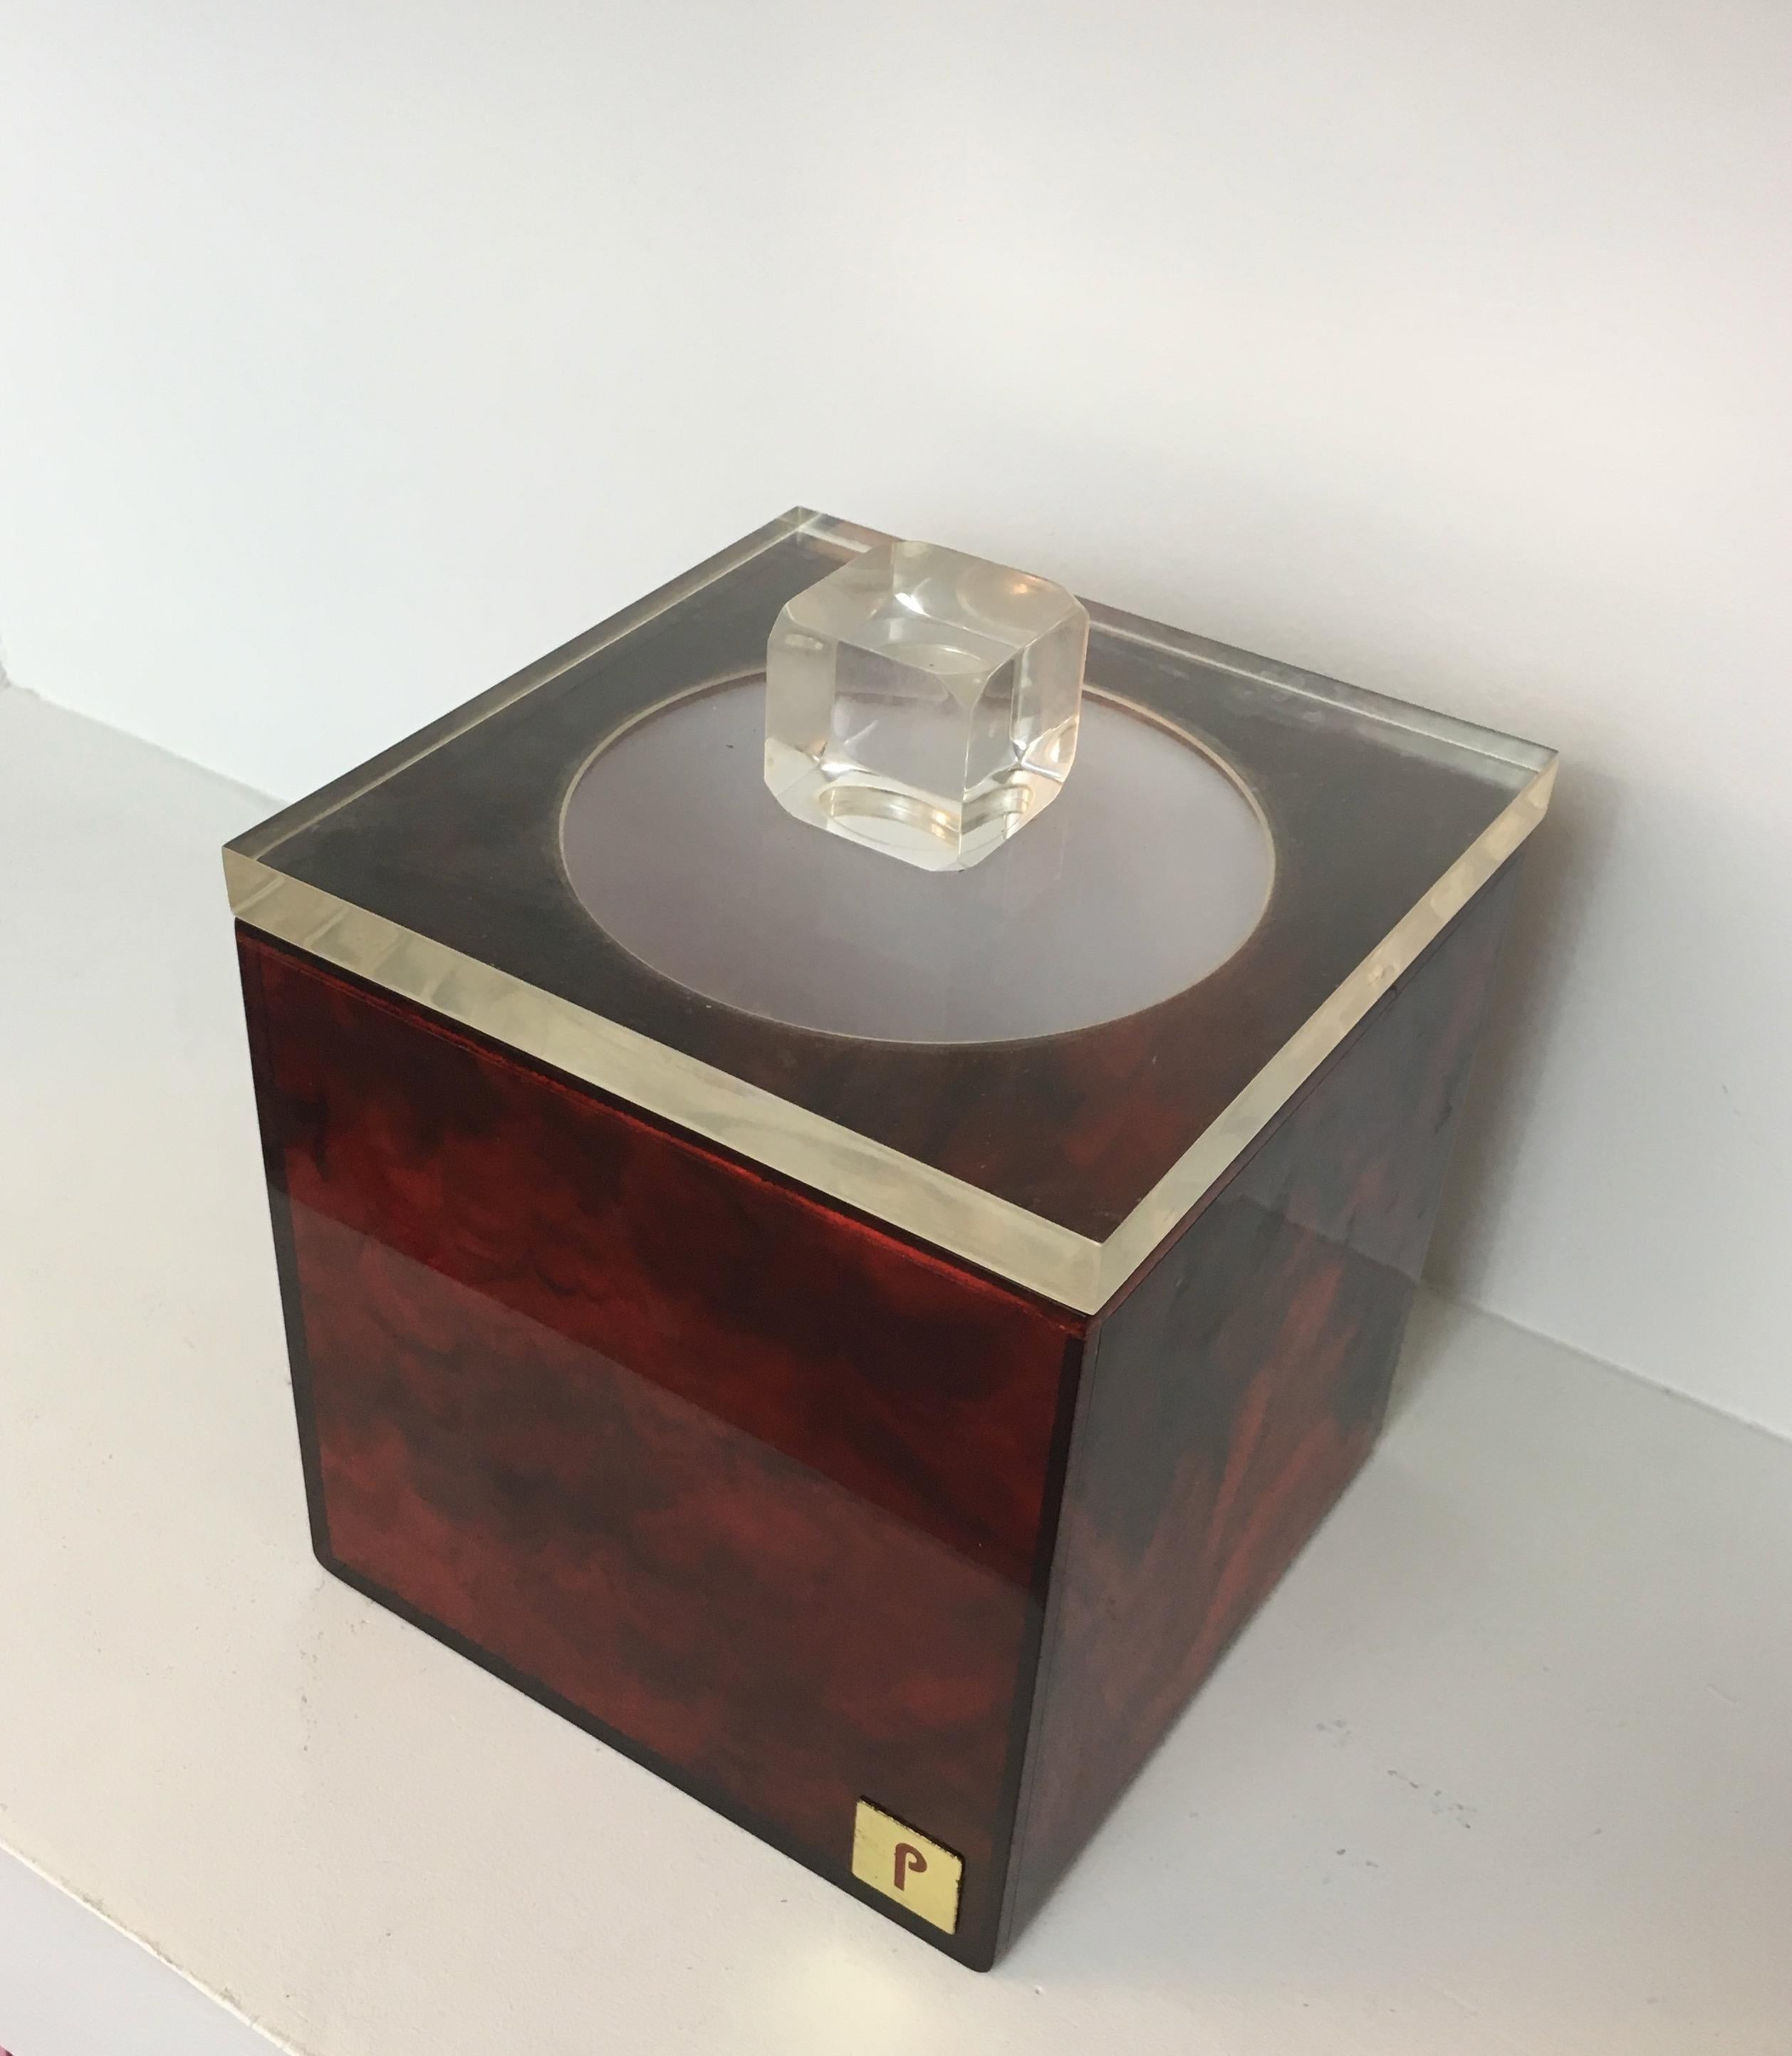 This unusual design ice bucket is made of red and clear lucite. This is a nice model, very simple and elegant. This is a French work, signed P. Circa 1970.